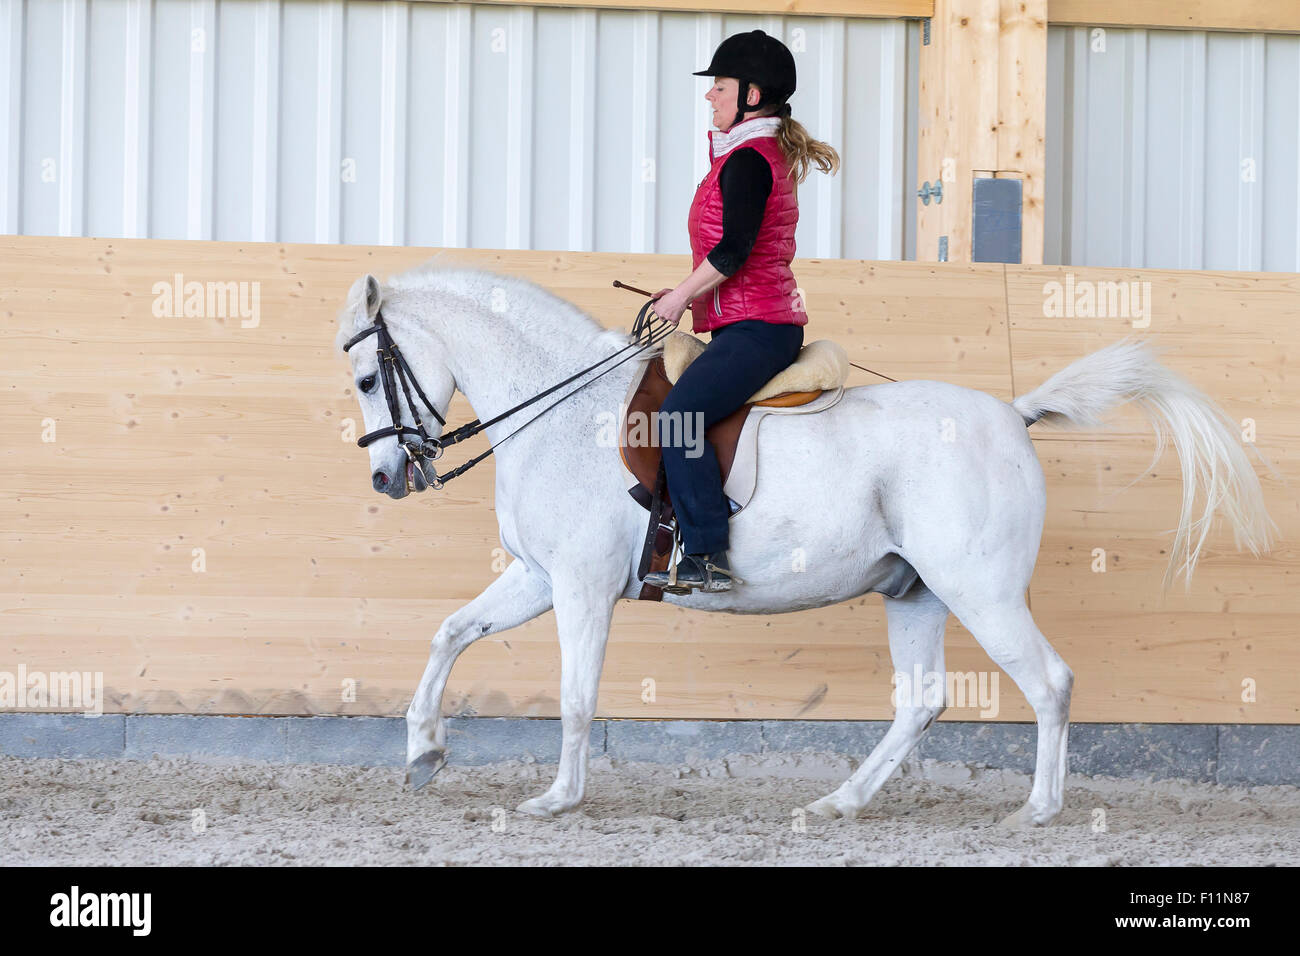 German Riding Pony Rider white pony performing counter canter Stock Photo